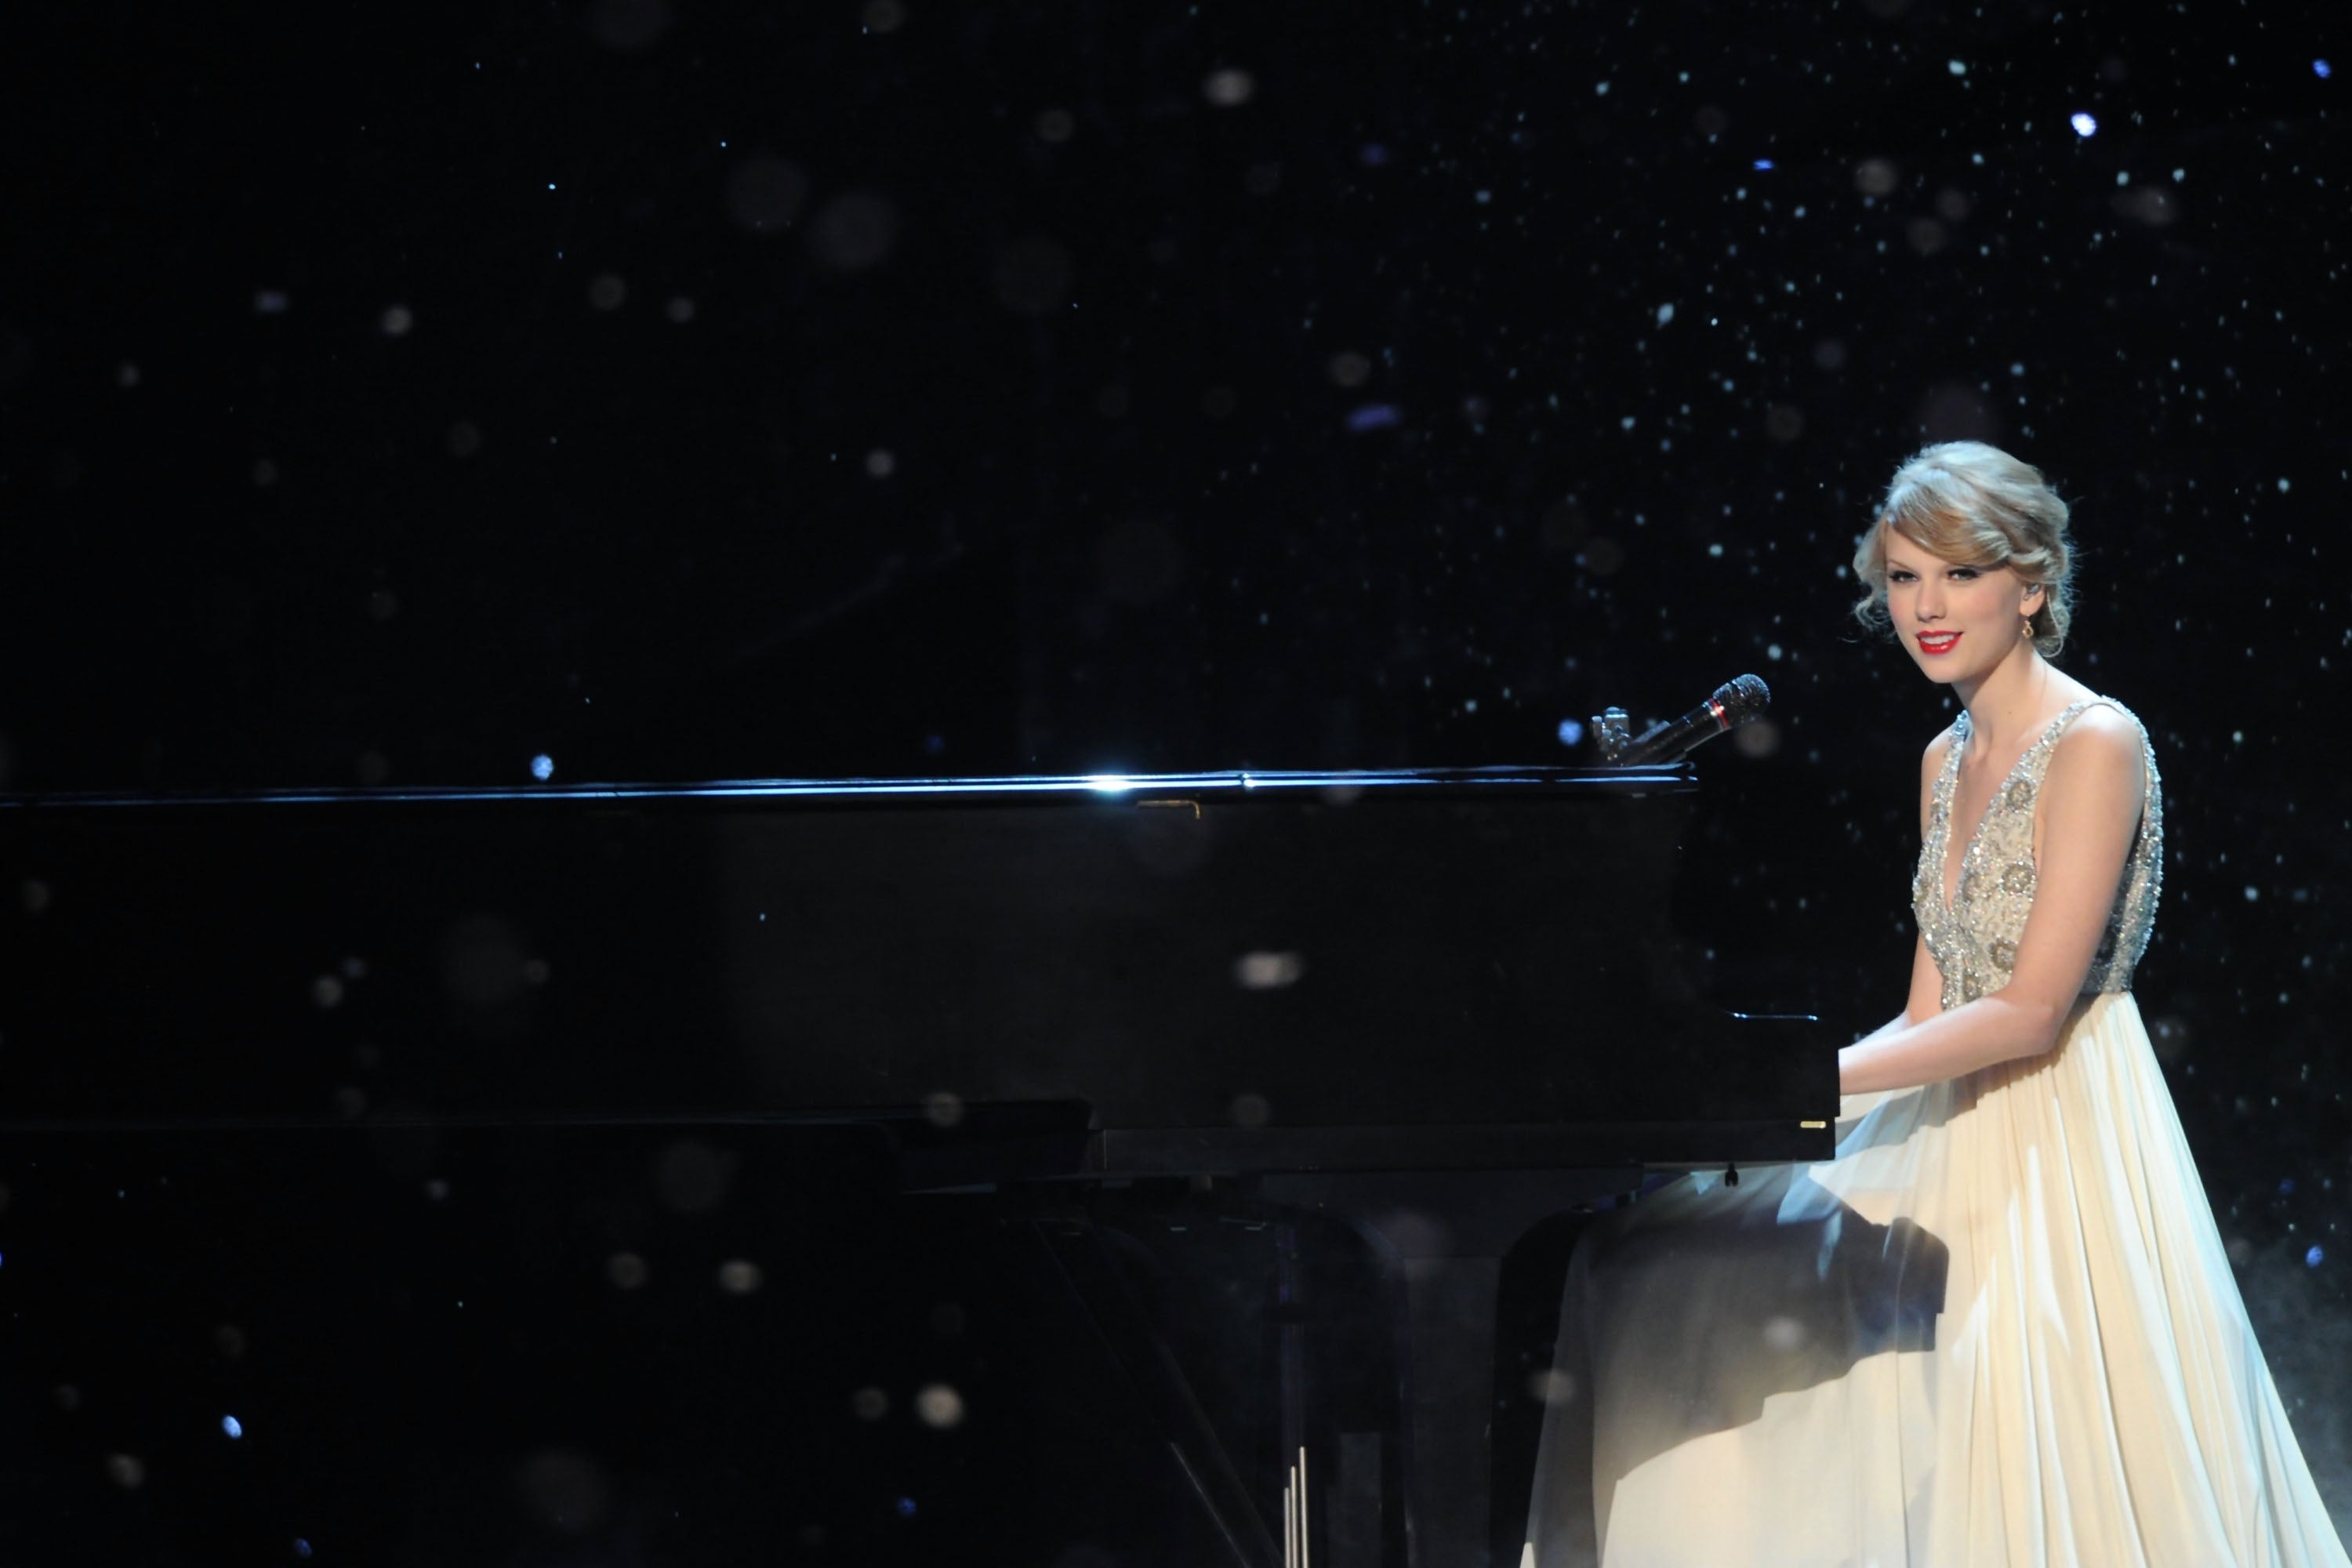 Swift performing ‘Back to December’ at the CMAs in 2010